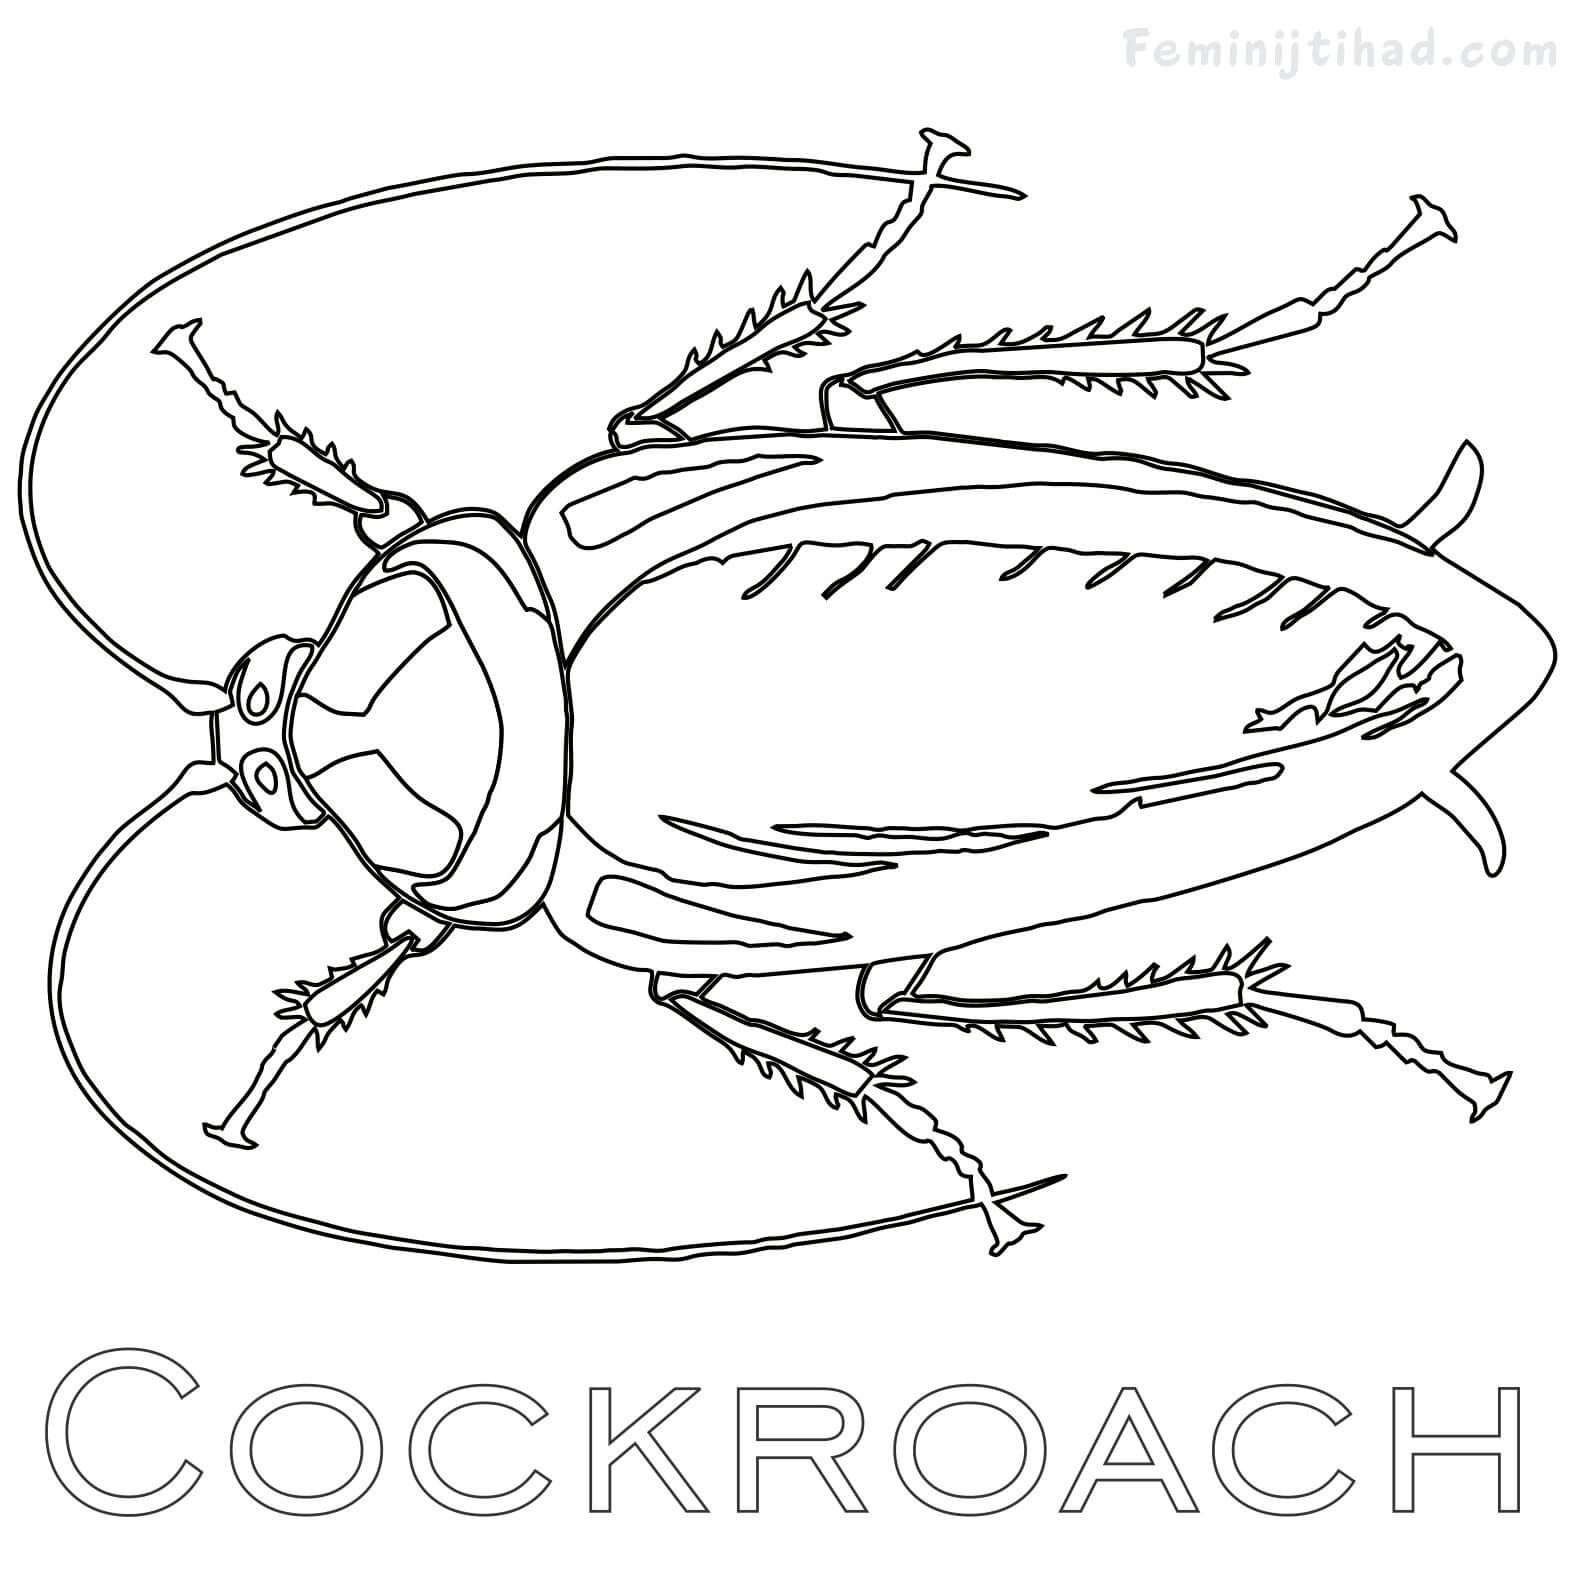 Cockroach Coloring Pages Printable - Free Coloring Sheets | Coloring pages,  Animal coloring pages, Free coloring sheets